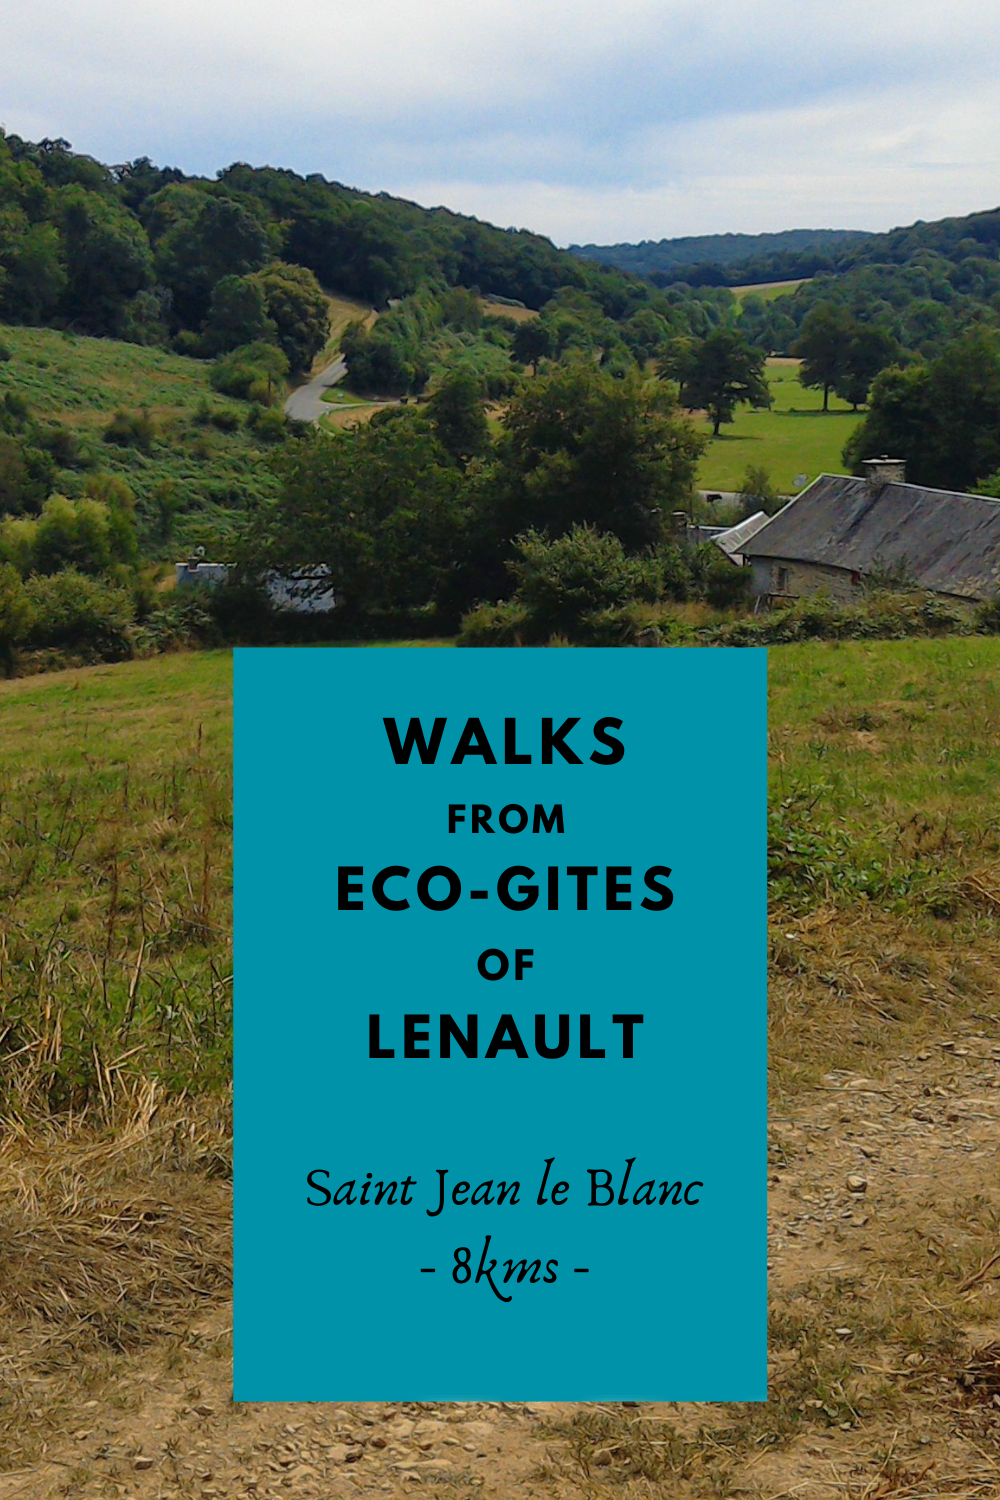 Walk from Eco-Gites of Lenault to Saint Jean le Blanc, Normandy, France